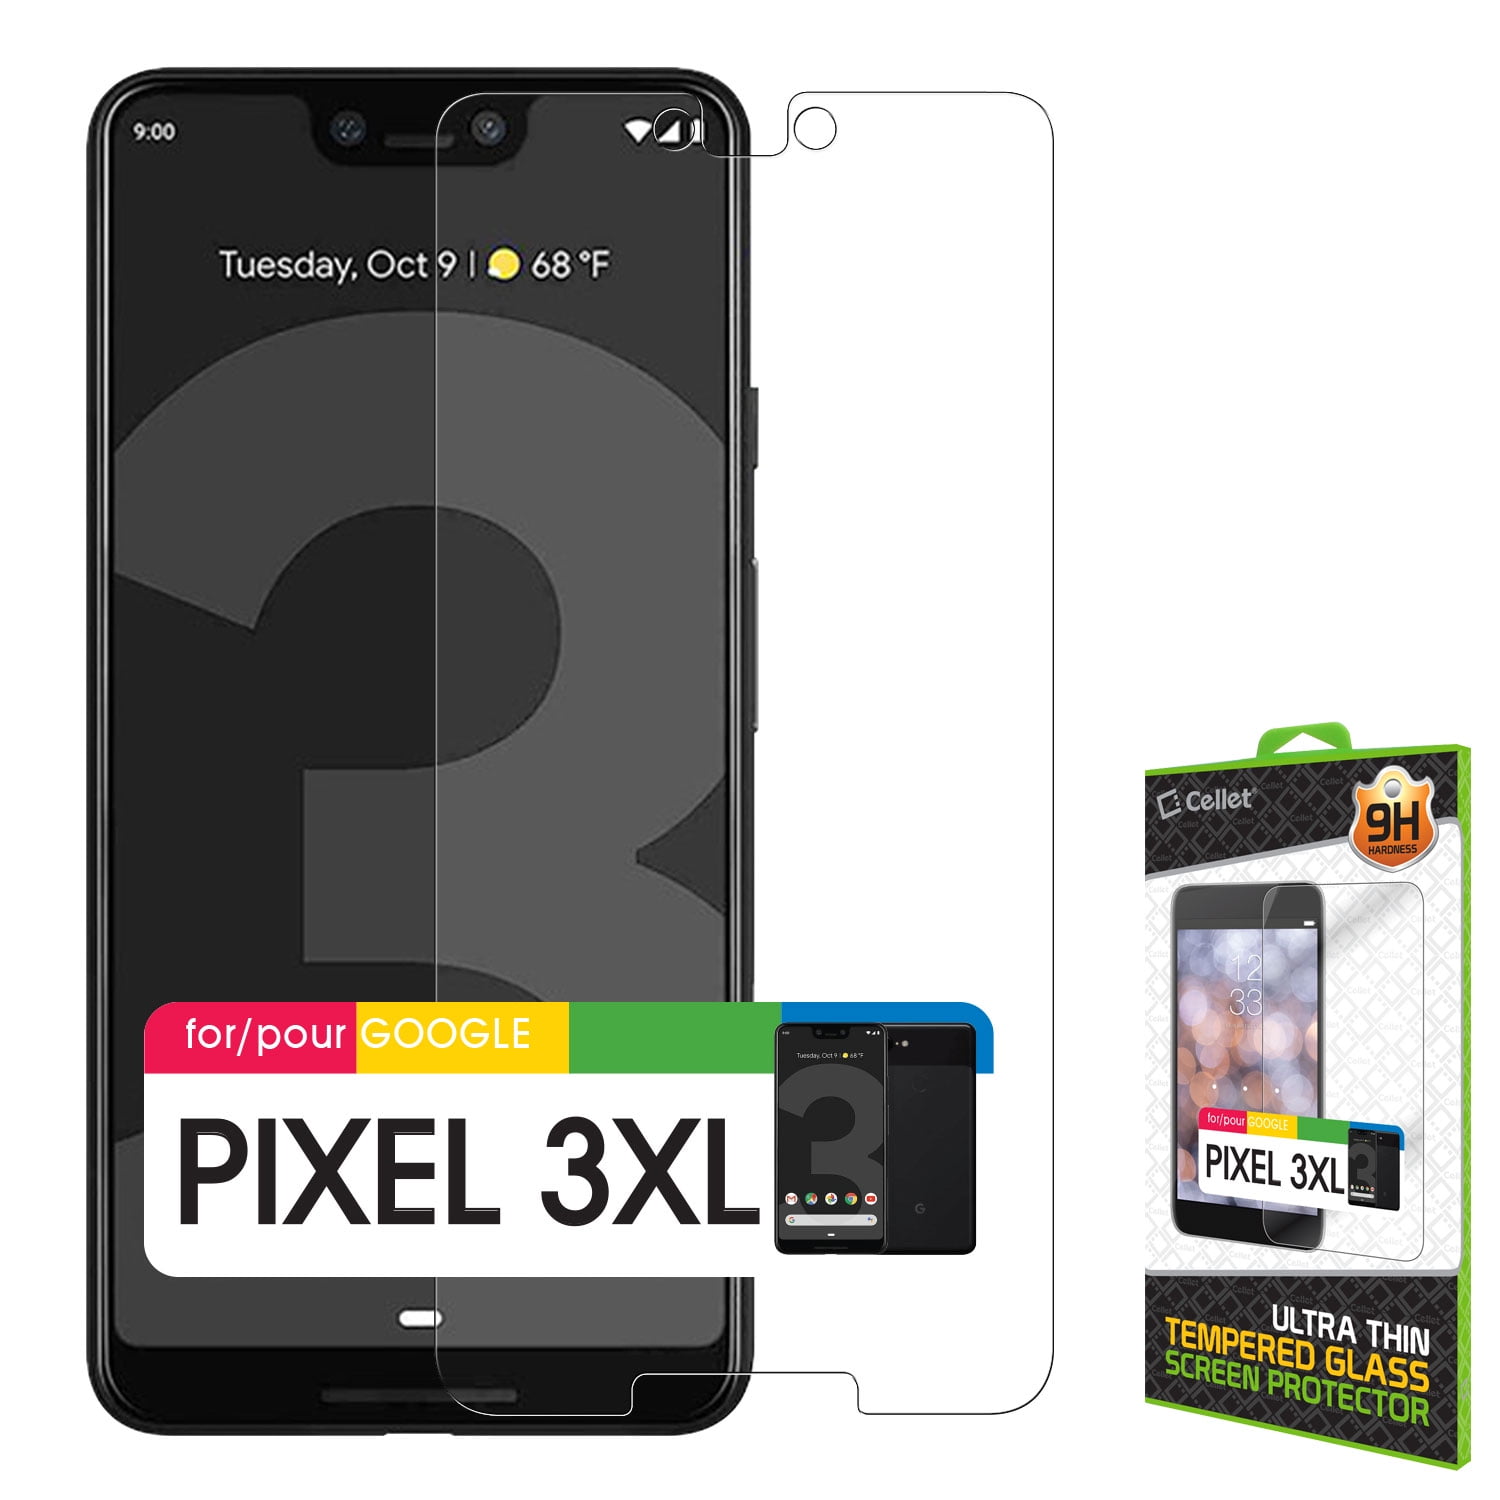 Details about   Premium HD Clarity Google Pixel 4 XL Tempered Glass Screen Protector 3 Pack 